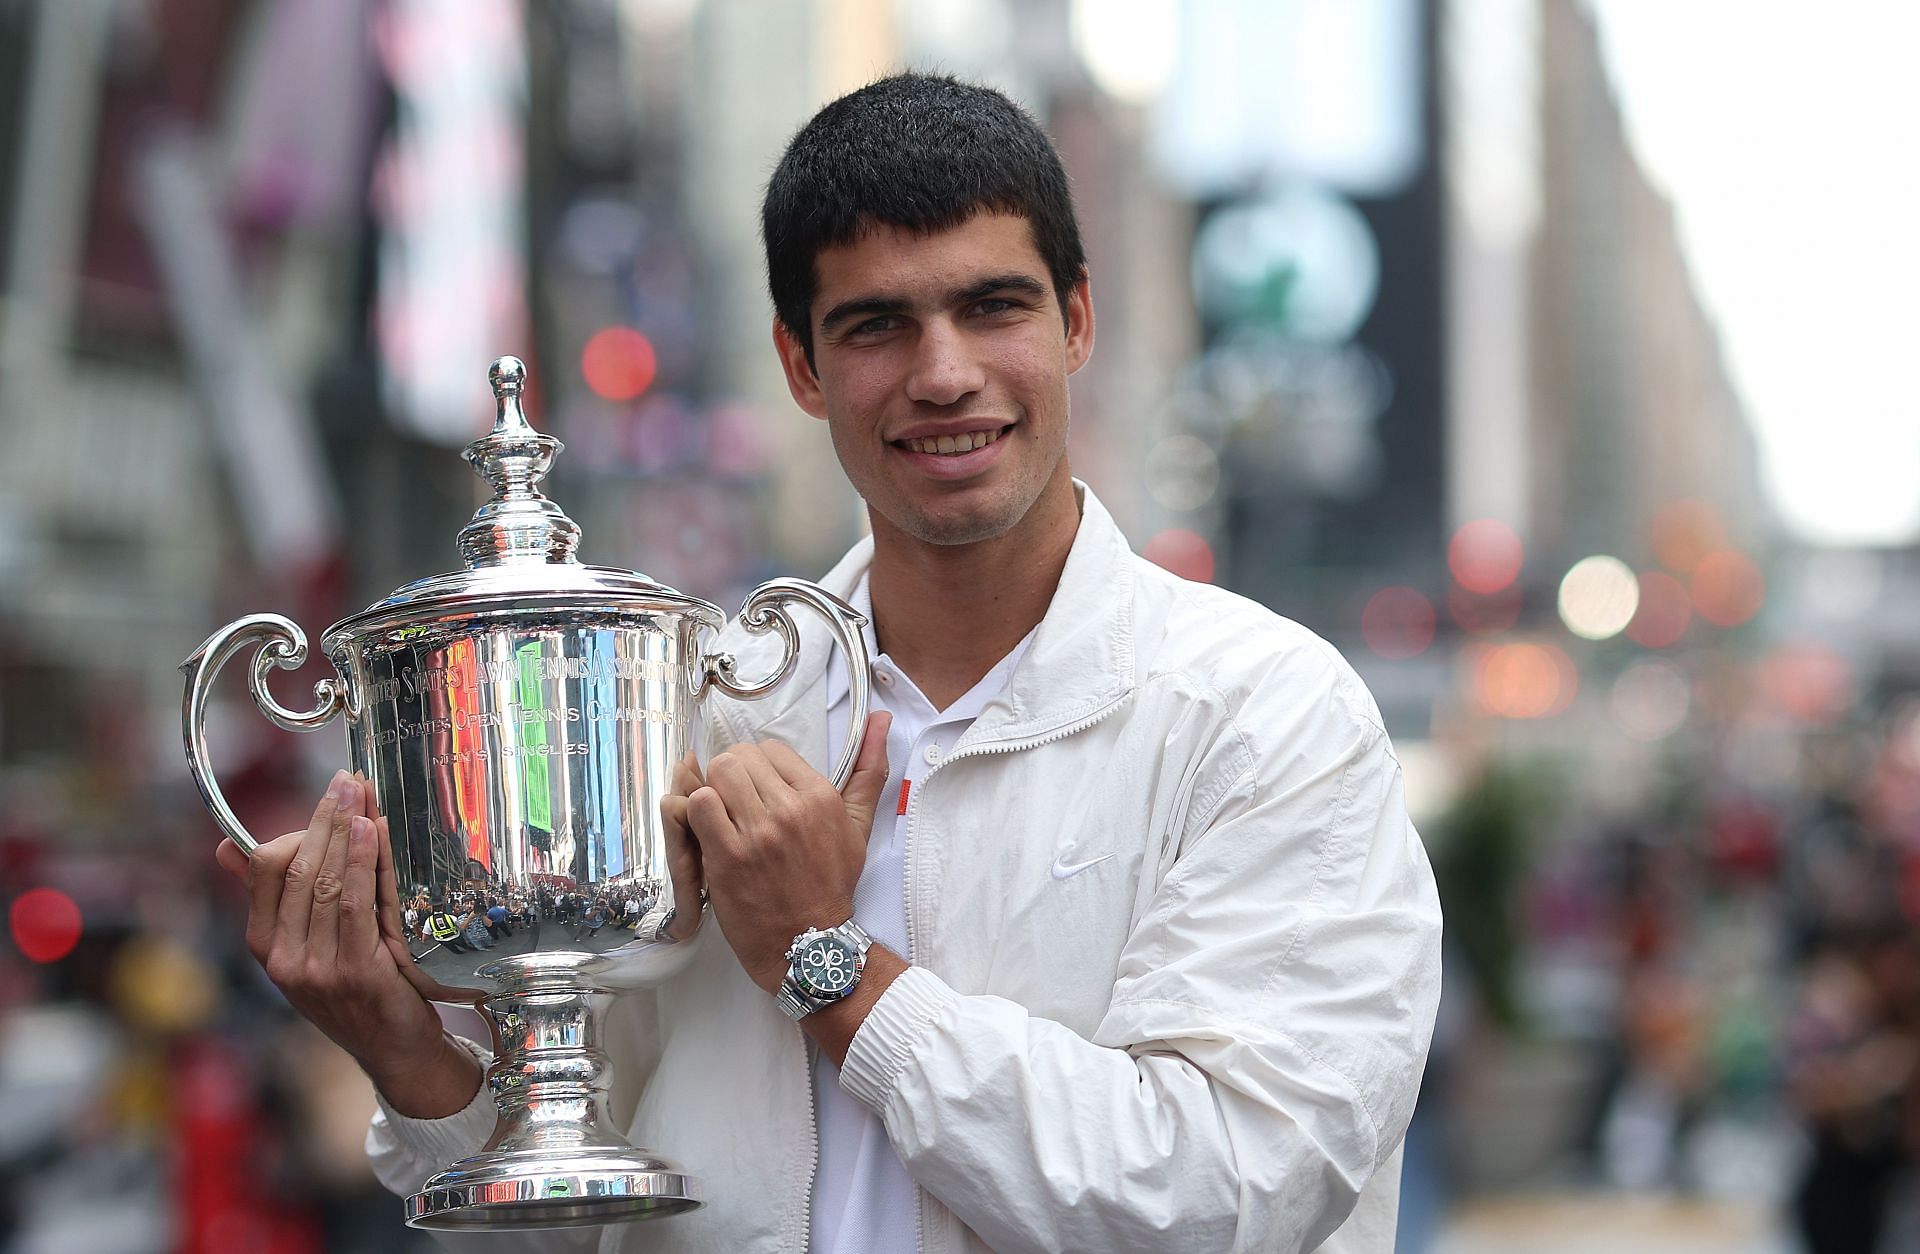 Carlos Alcaraz clinched his maiden Grand Slam at the 2022 US Open